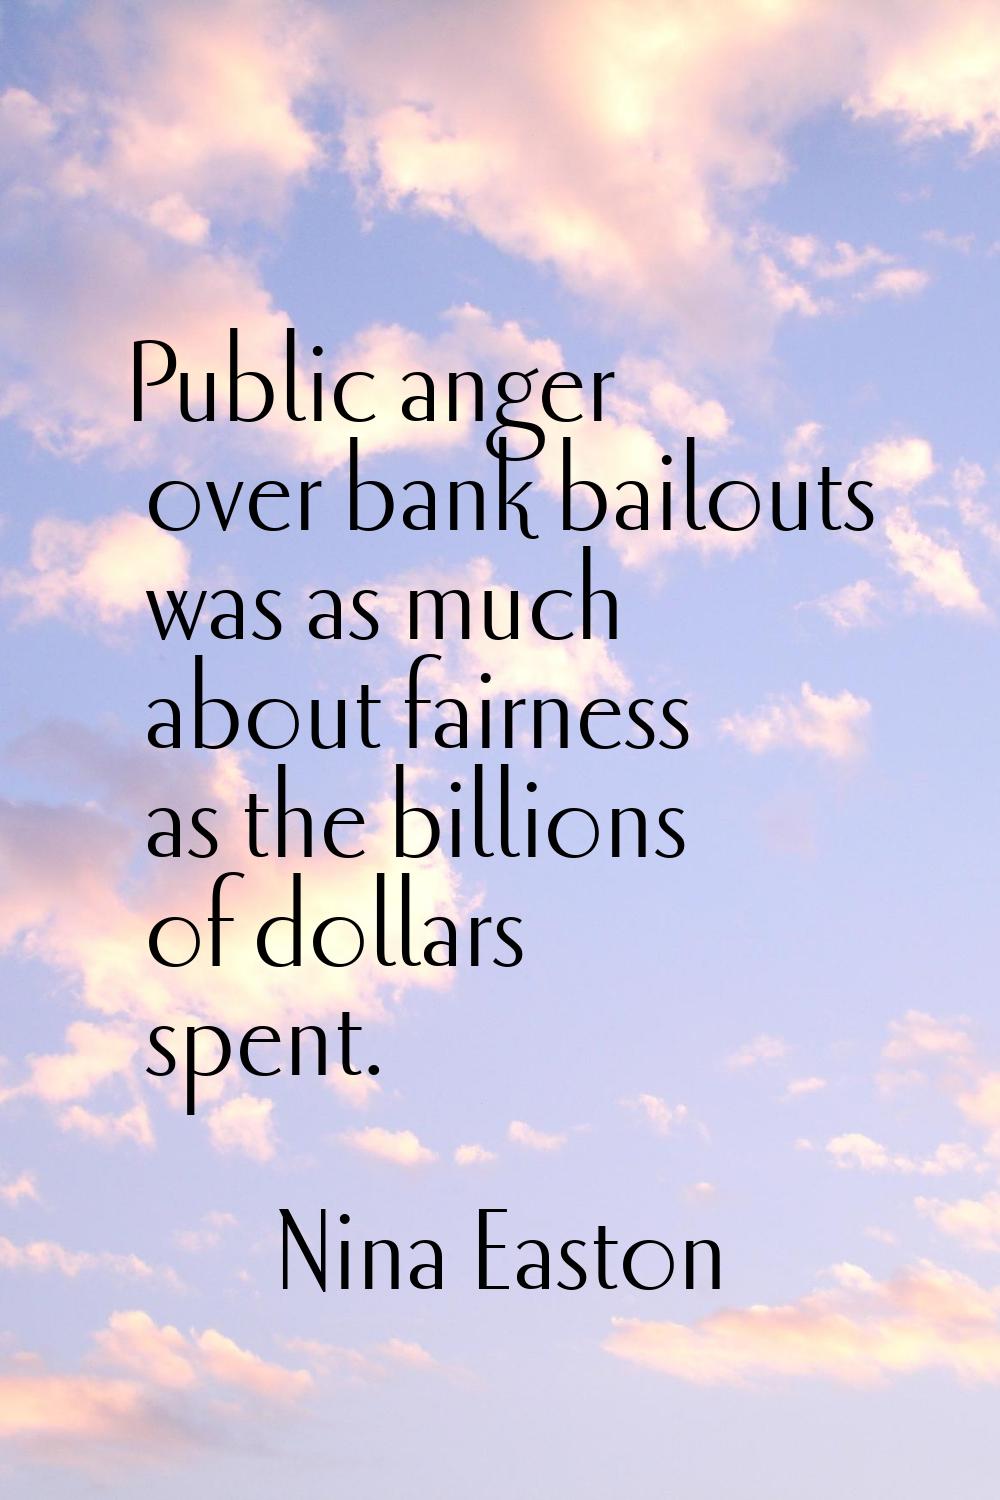 Public anger over bank bailouts was as much about fairness as the billions of dollars spent.